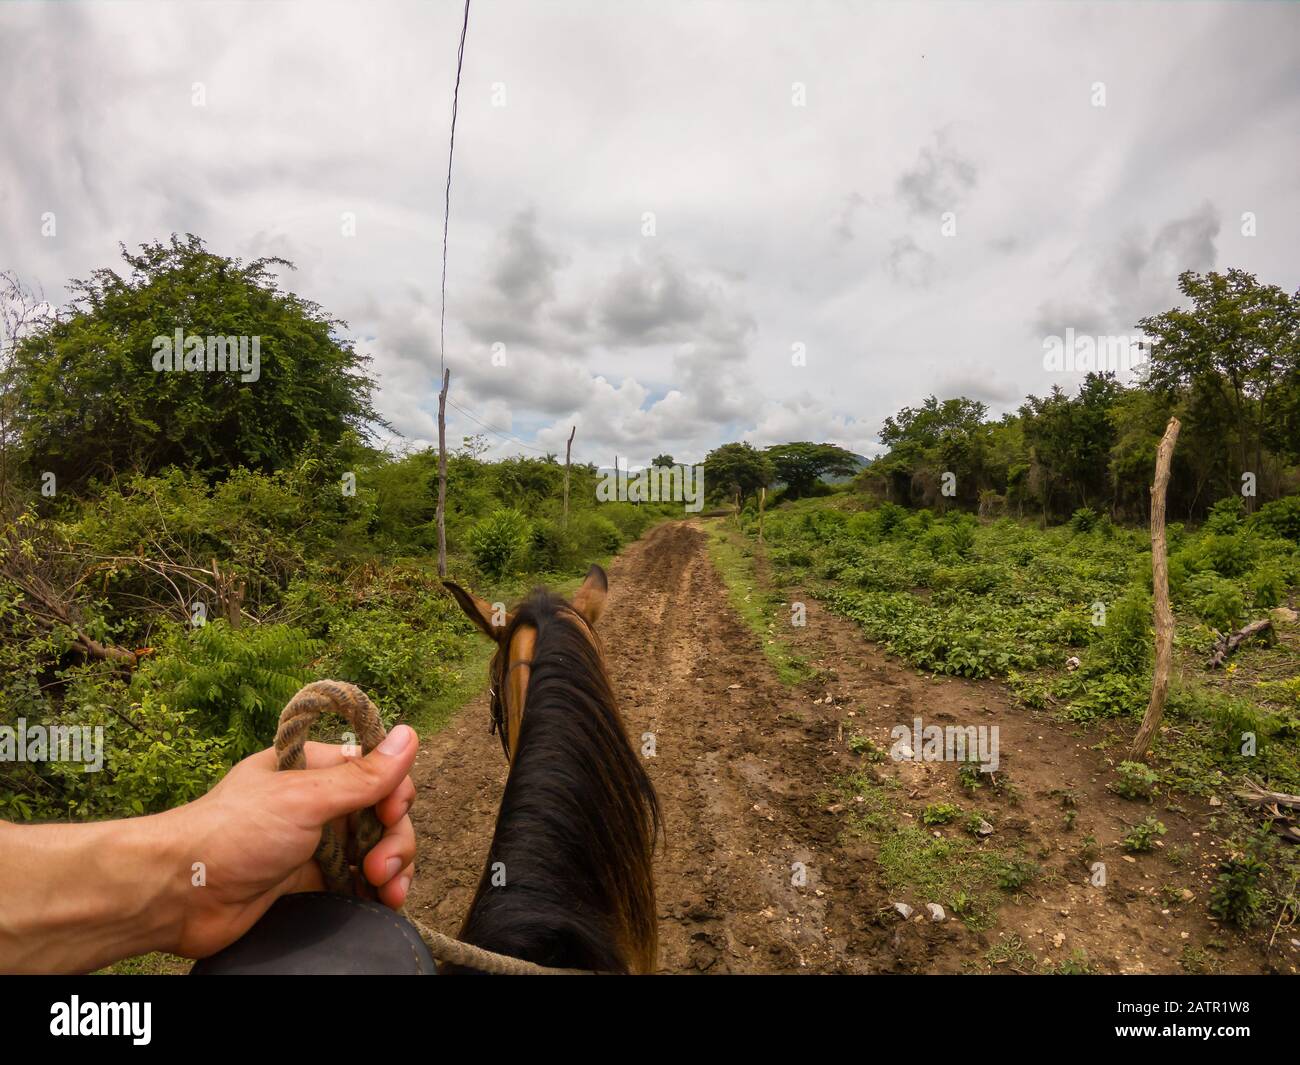 Horseback Riding on a dirty trail in the country side near a small Cuban Town during a vibrant sunny day. Taken in Trinidad, Cuba. Stock Photo